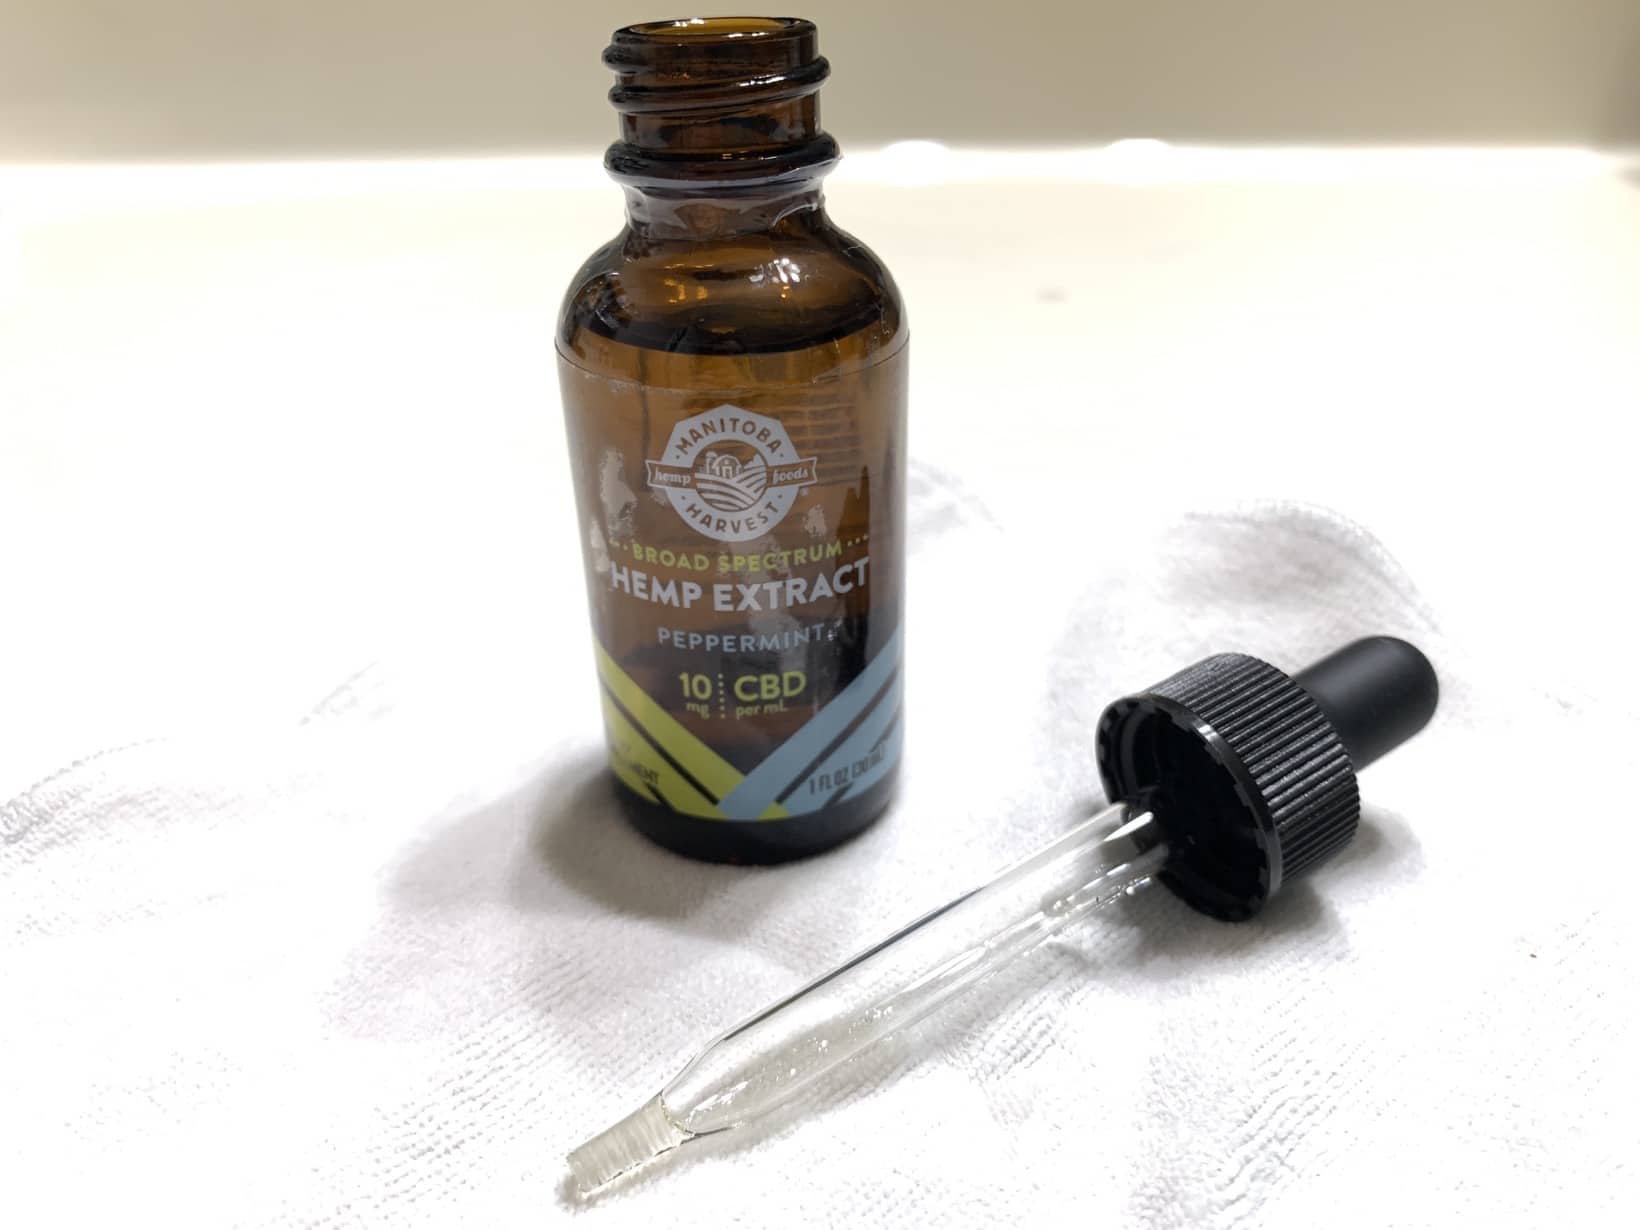 Broad Spectrum Hemp Extract with CBD Oil Drops in Peppermint